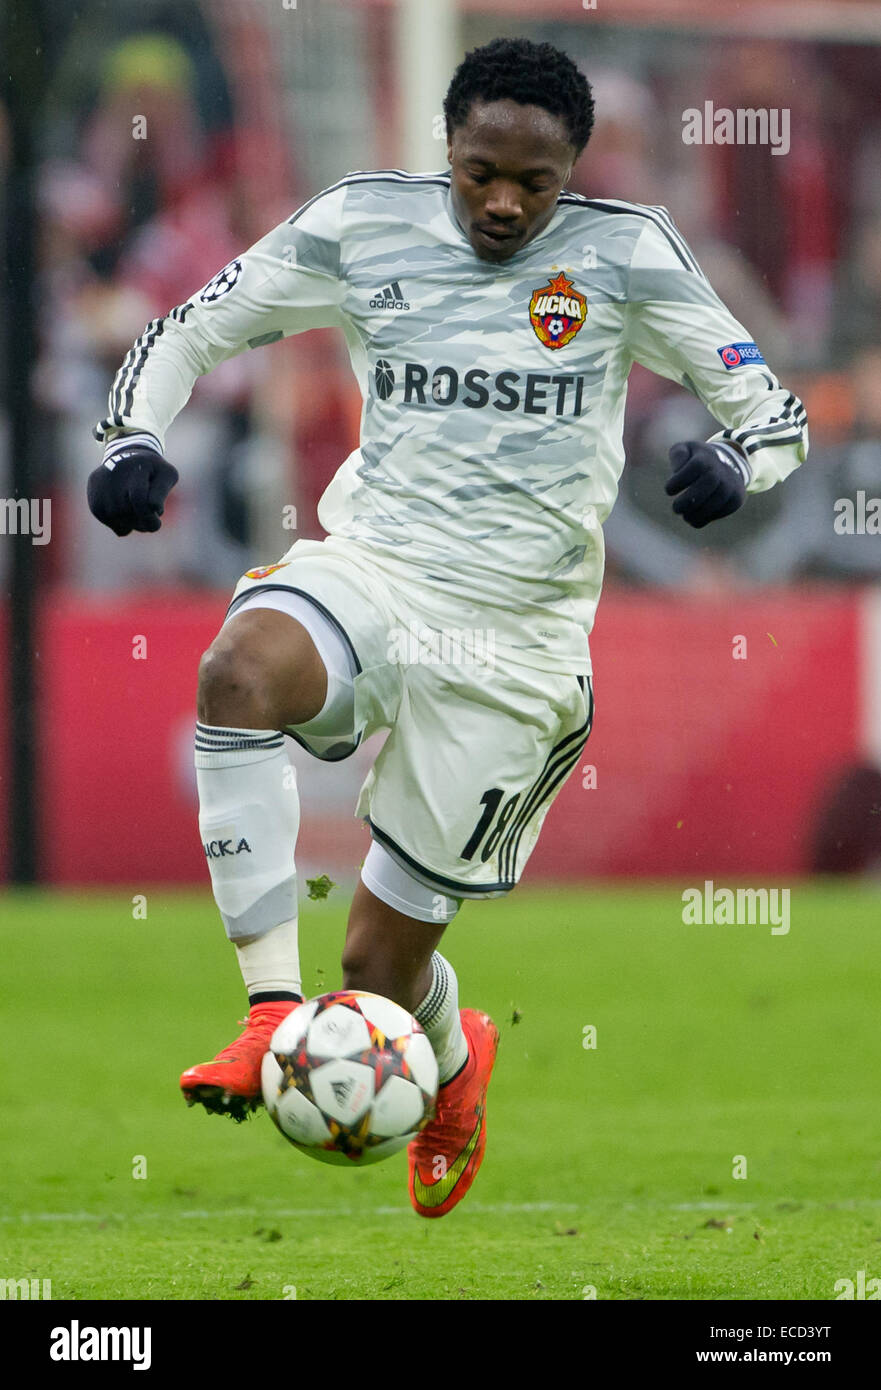 Munich, Germany. 10th Dec, 2014. Moscow's Ahmed Musa in action with the ball during the Champions League Group E match between FC Bayern Munich and ZSKA Moscow in Munich, Germany, 10 December 2014. Photo: Sven Hoppe/dpa/Alamy Live News Stock Photo